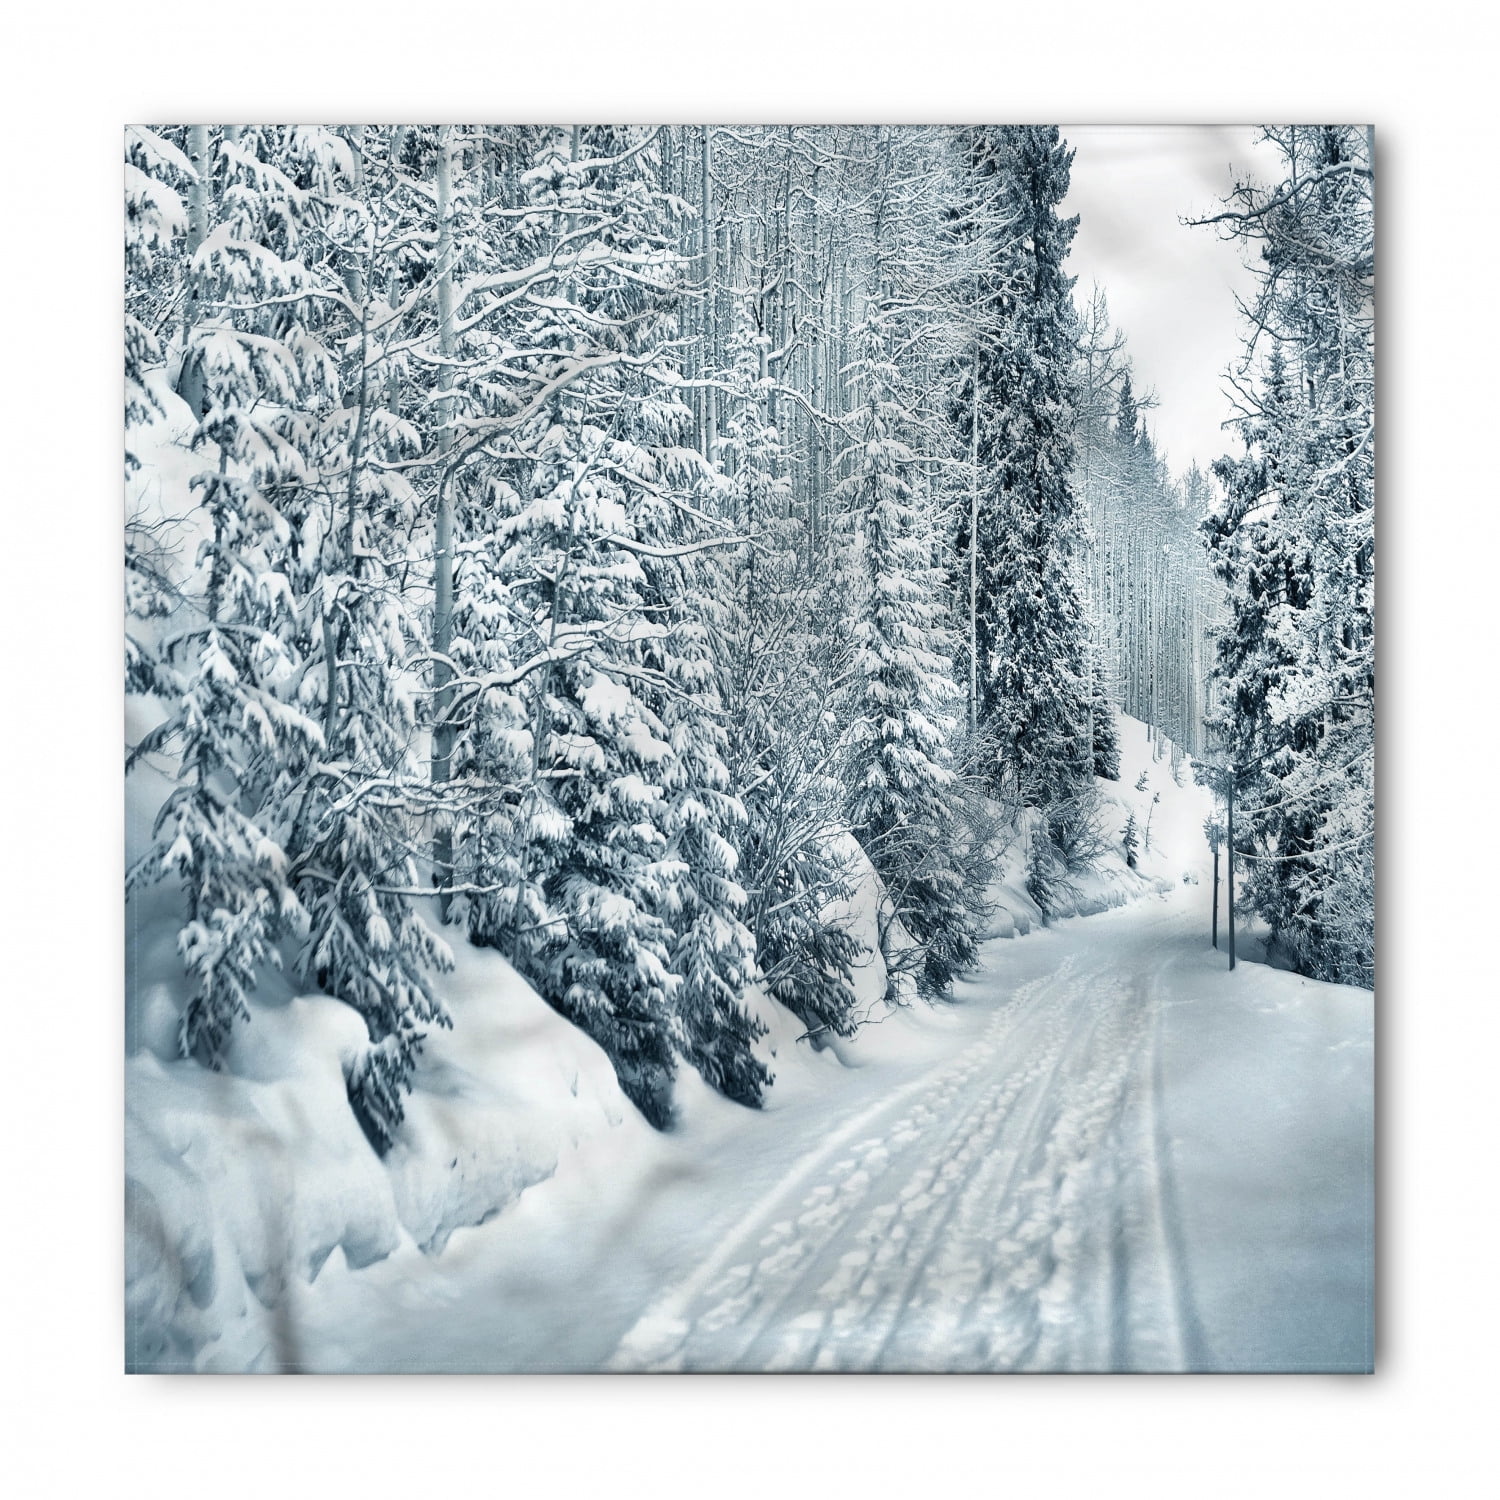 fax Infecteren Rook Winter Bandana, Ski Theme Snowy Road, Unisex Head and Neck Tie, by  Ambesonne - Walmart.com